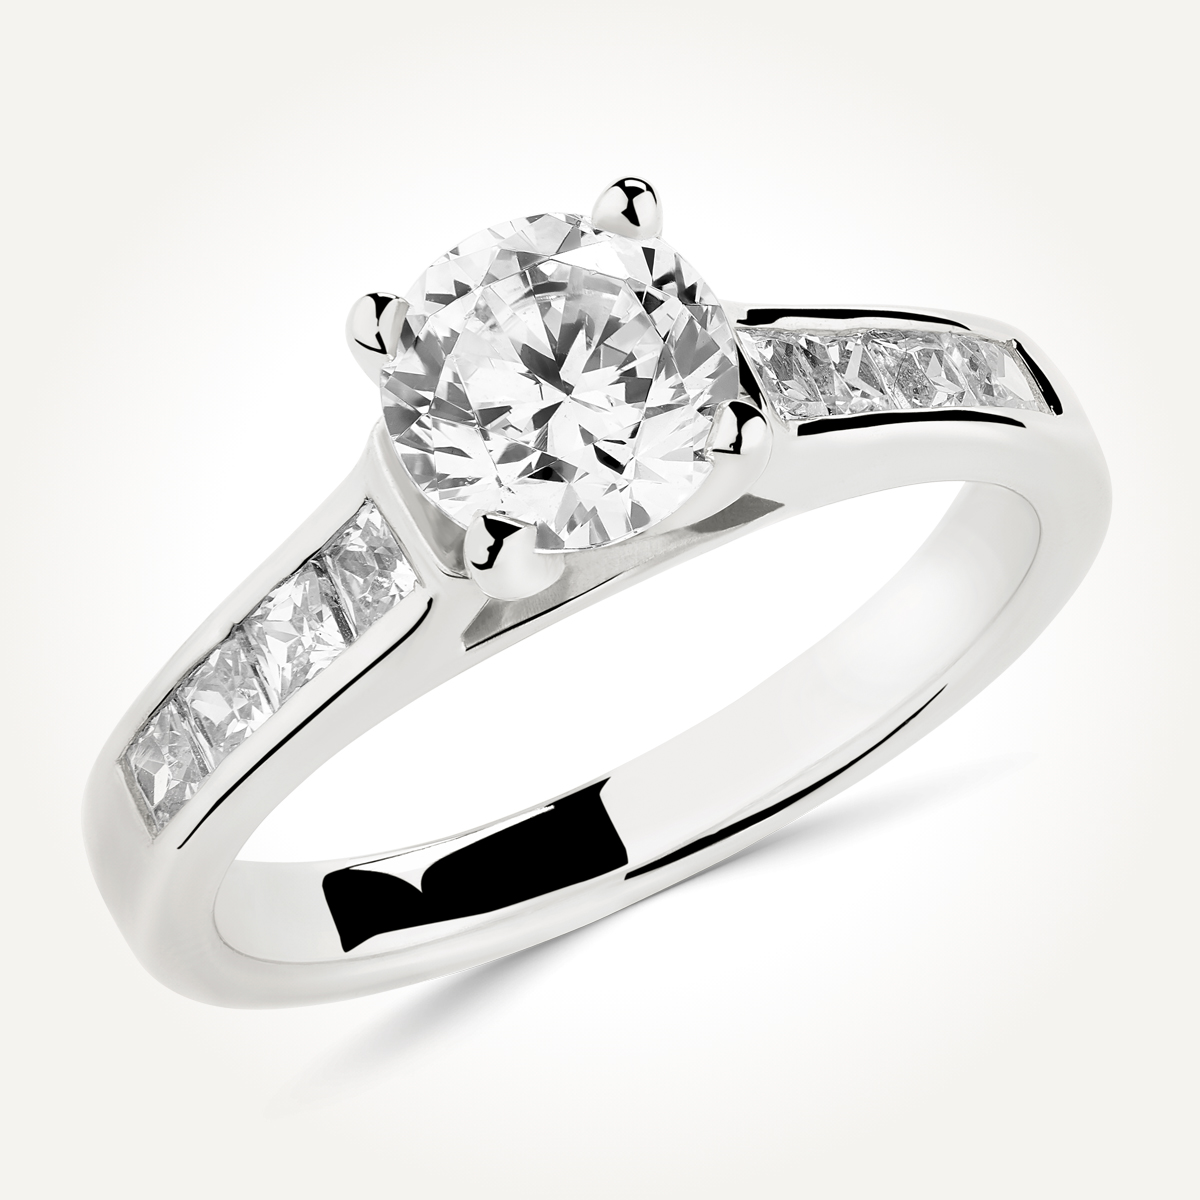 Multi Stone Engagement Ring - 7497 A